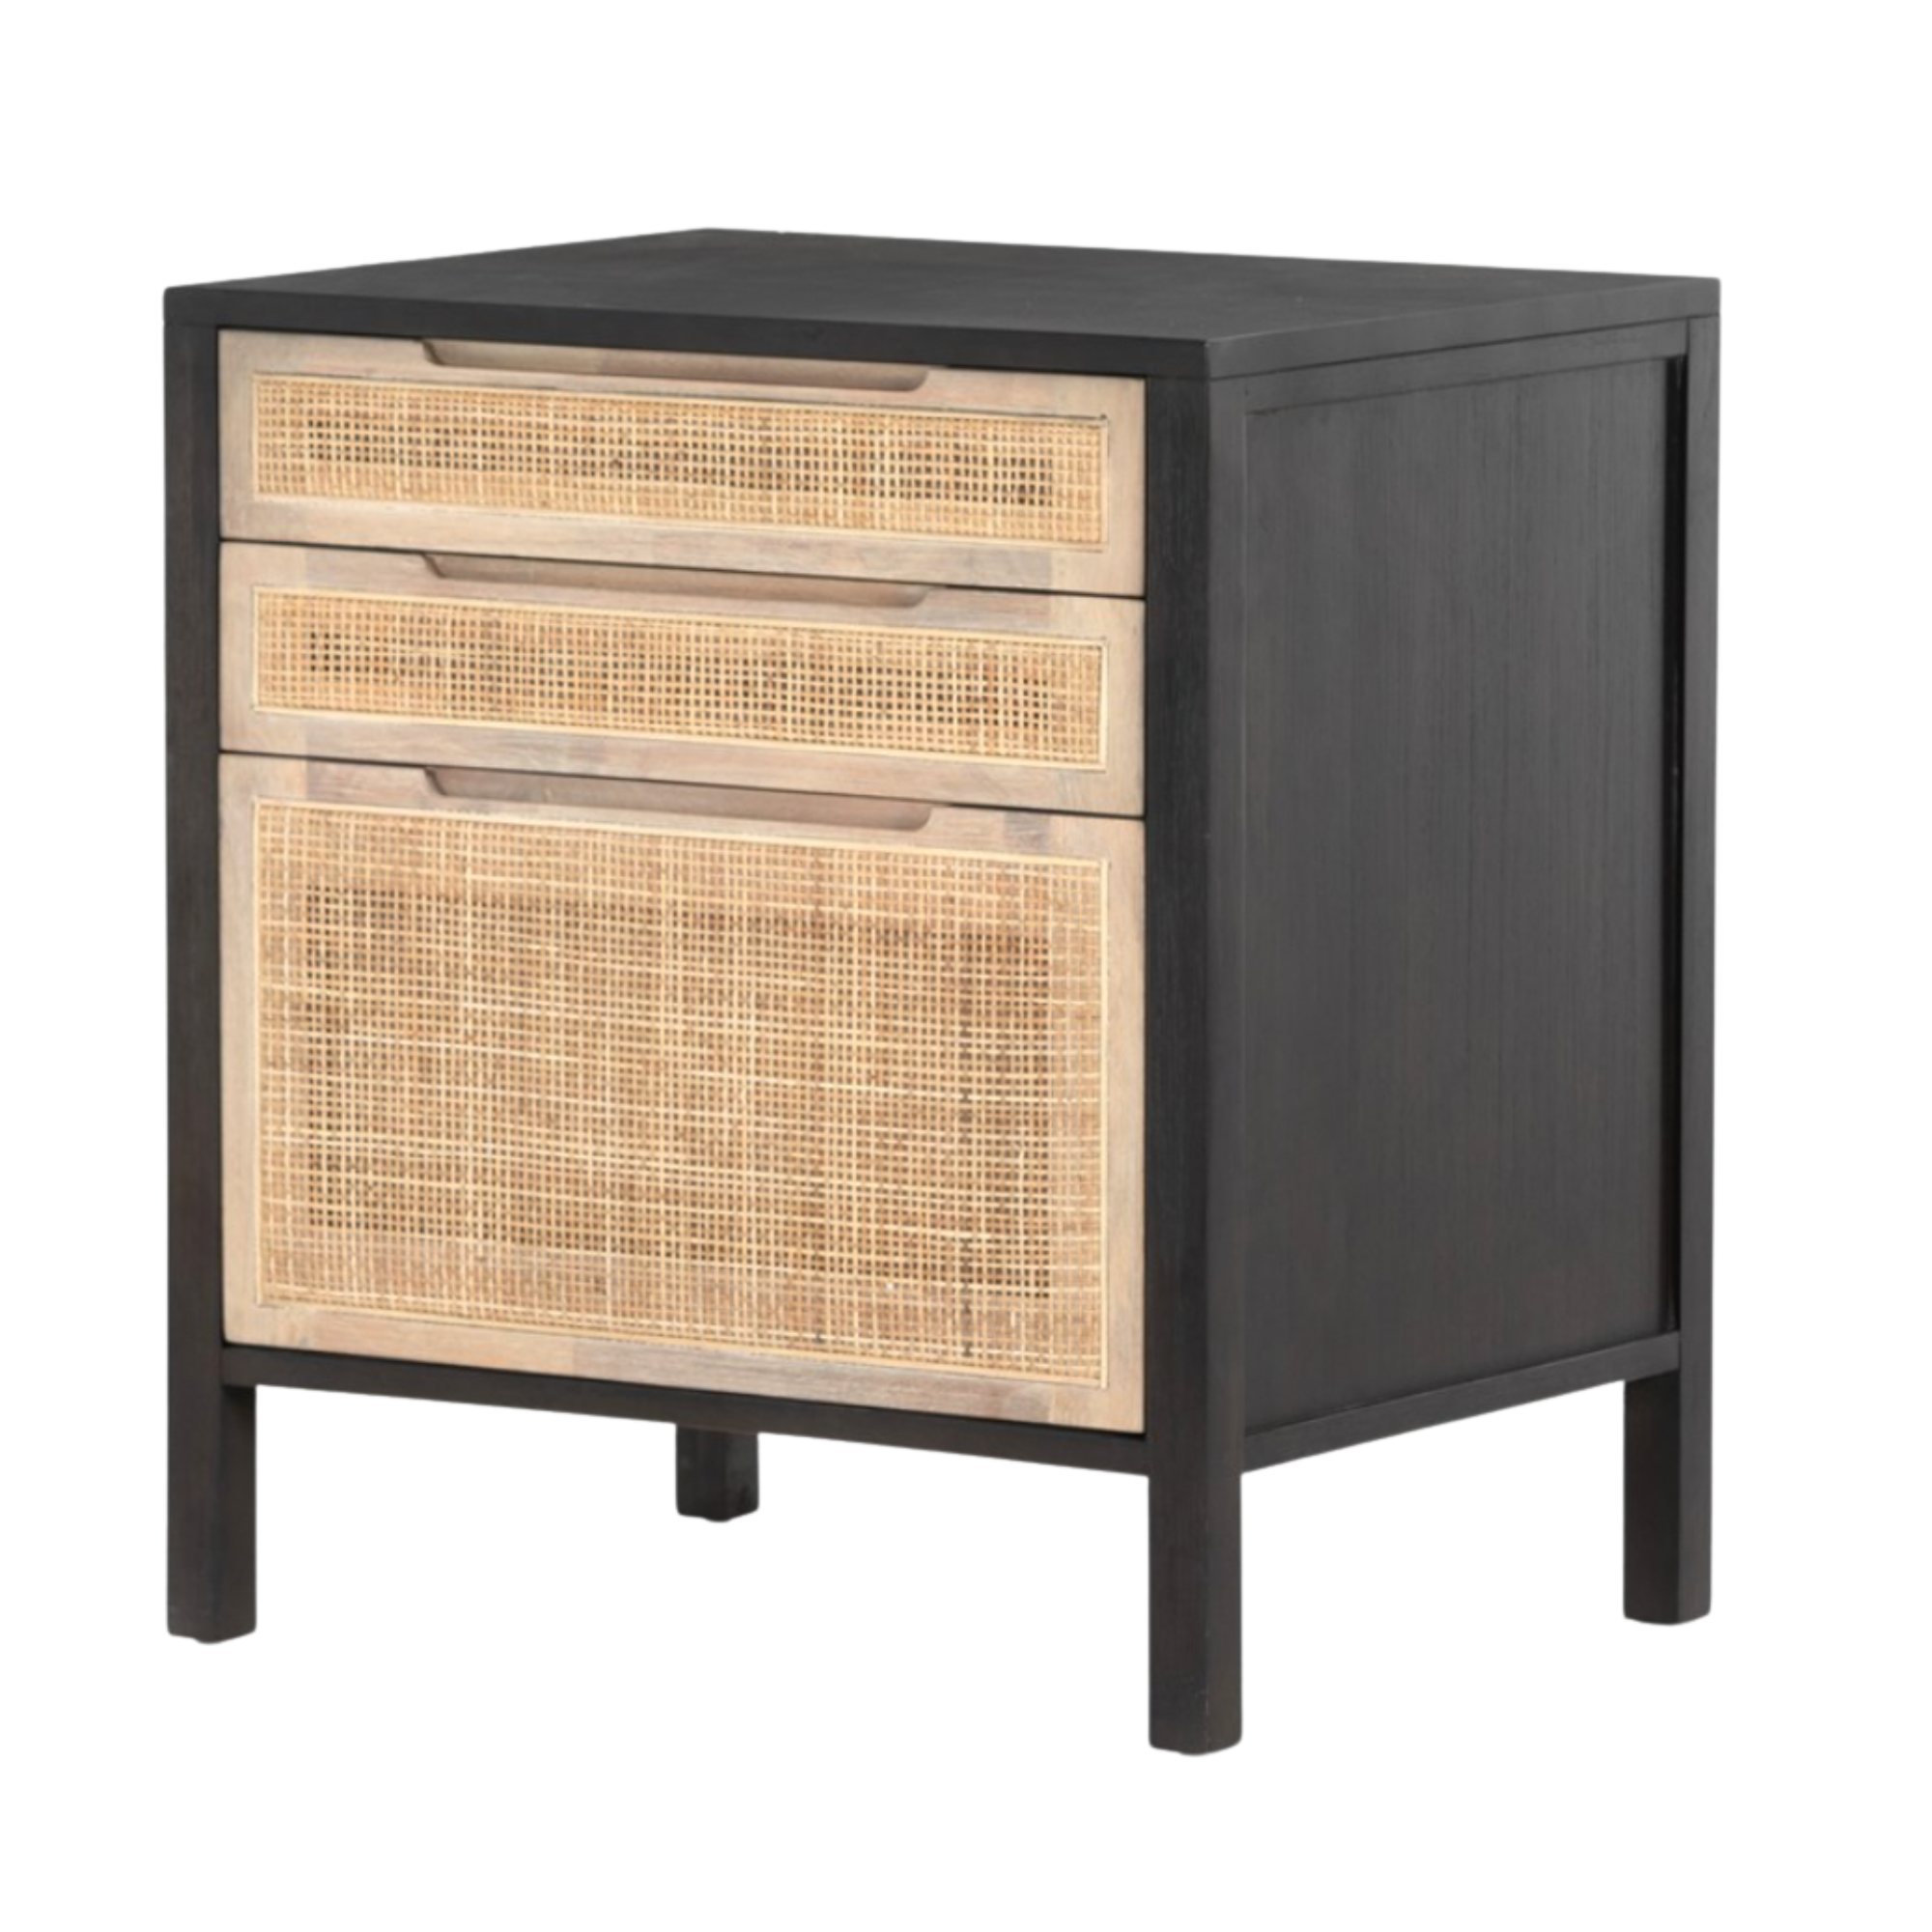 Claire Filing Cabinet - Black